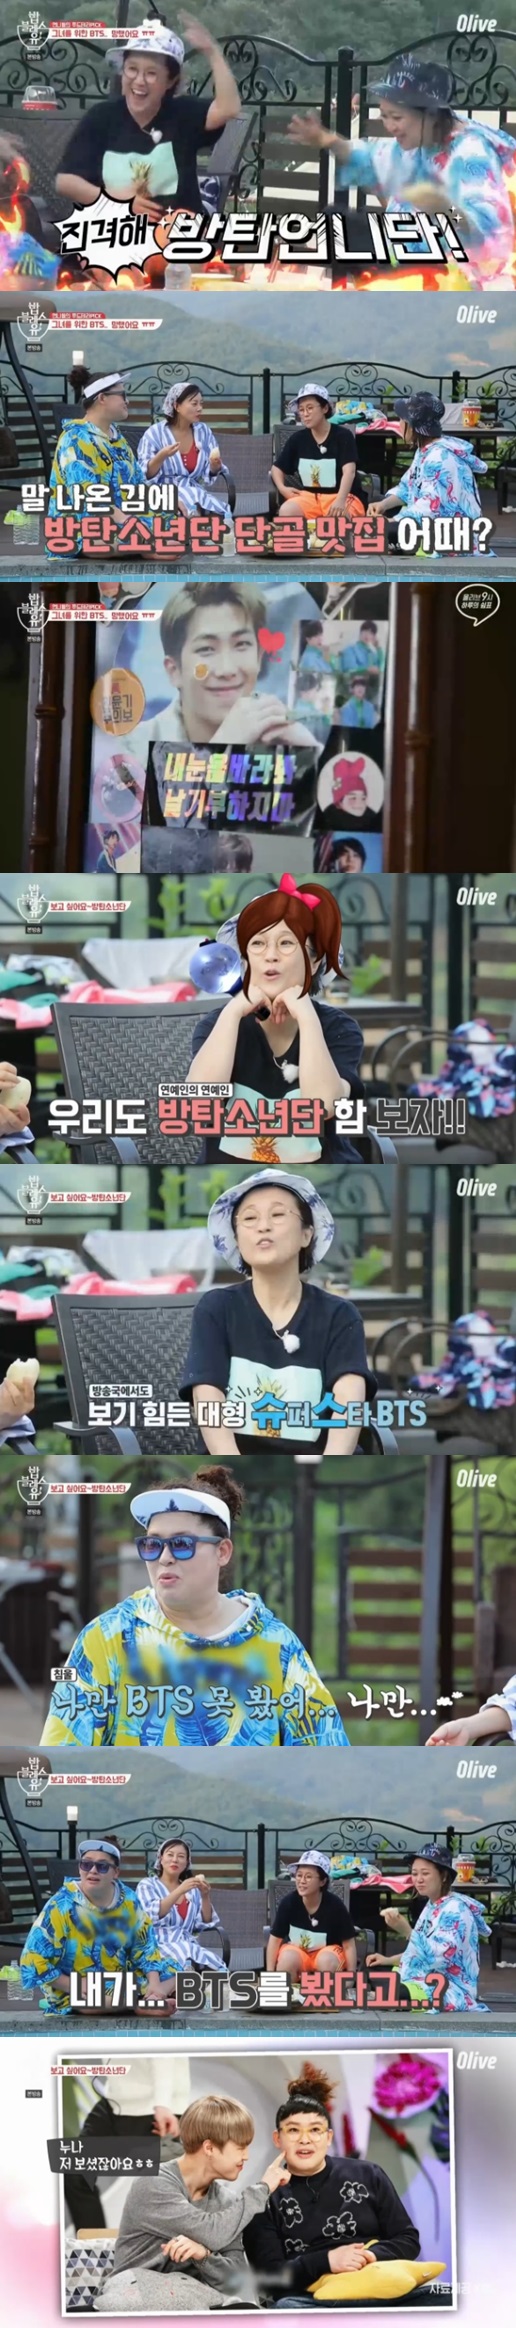 The comedian Song Eun-yi told the group BTS after meeting.On the cable channel Olive Bobblesse broadcasted on the night of the 16th, the second story of the first summer unity contest was drawn.Lee Young-ja, who listened to a mans story that he danced in front of a woman who was in love with her, but her body did not follow, recommended soft and hot porridge.Song Eun-yi suggested a Good Restaurant that BTS frequently goes, and Lee Young-ja said: We have to go, even for a moment, we have to see BTS.I cant see it and Im going to die, he said, expressing his self-interest.Choi Hwa-jung said, I once came to our radio when I was a rookie. Song Eun-yi said, I once saw it in RM and stockings.I thought it would be big because the buff was overflowing, he said, envious of Lee Young-ja.However, Lee Young-ja, who realized that Jean, Jimin, Bhu and RM had come out of his ongoing Hello, said, I did not come out to BTS and did not know it by their names.